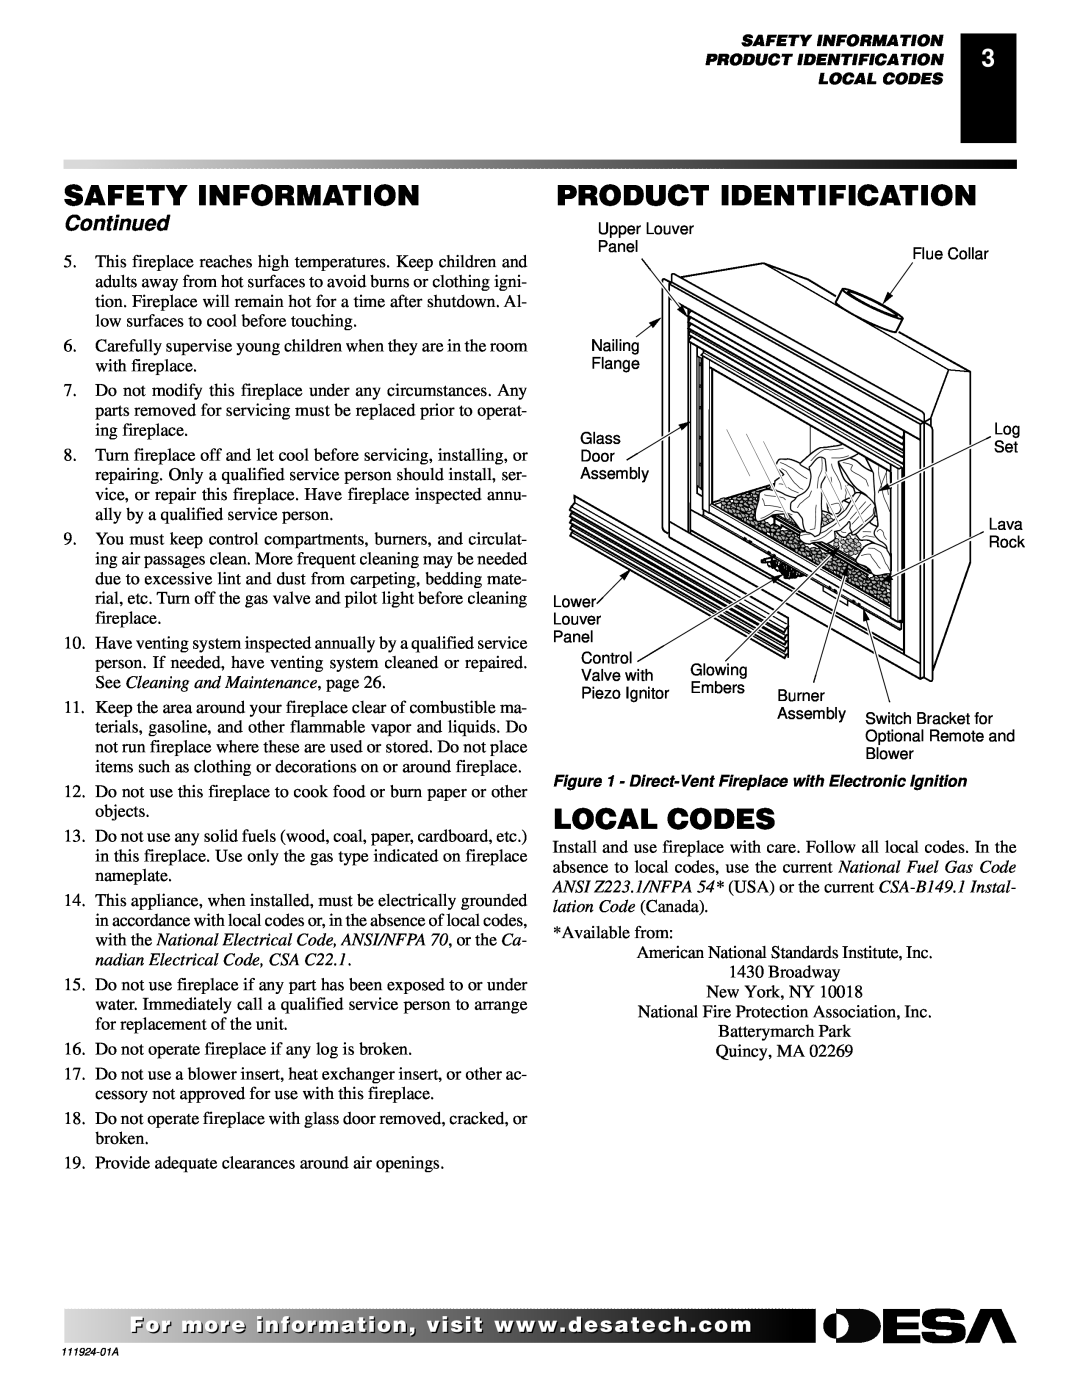 Desa K36EN, K36EP installation manual Product Identification, Local Codes, Continued, Safety Information 